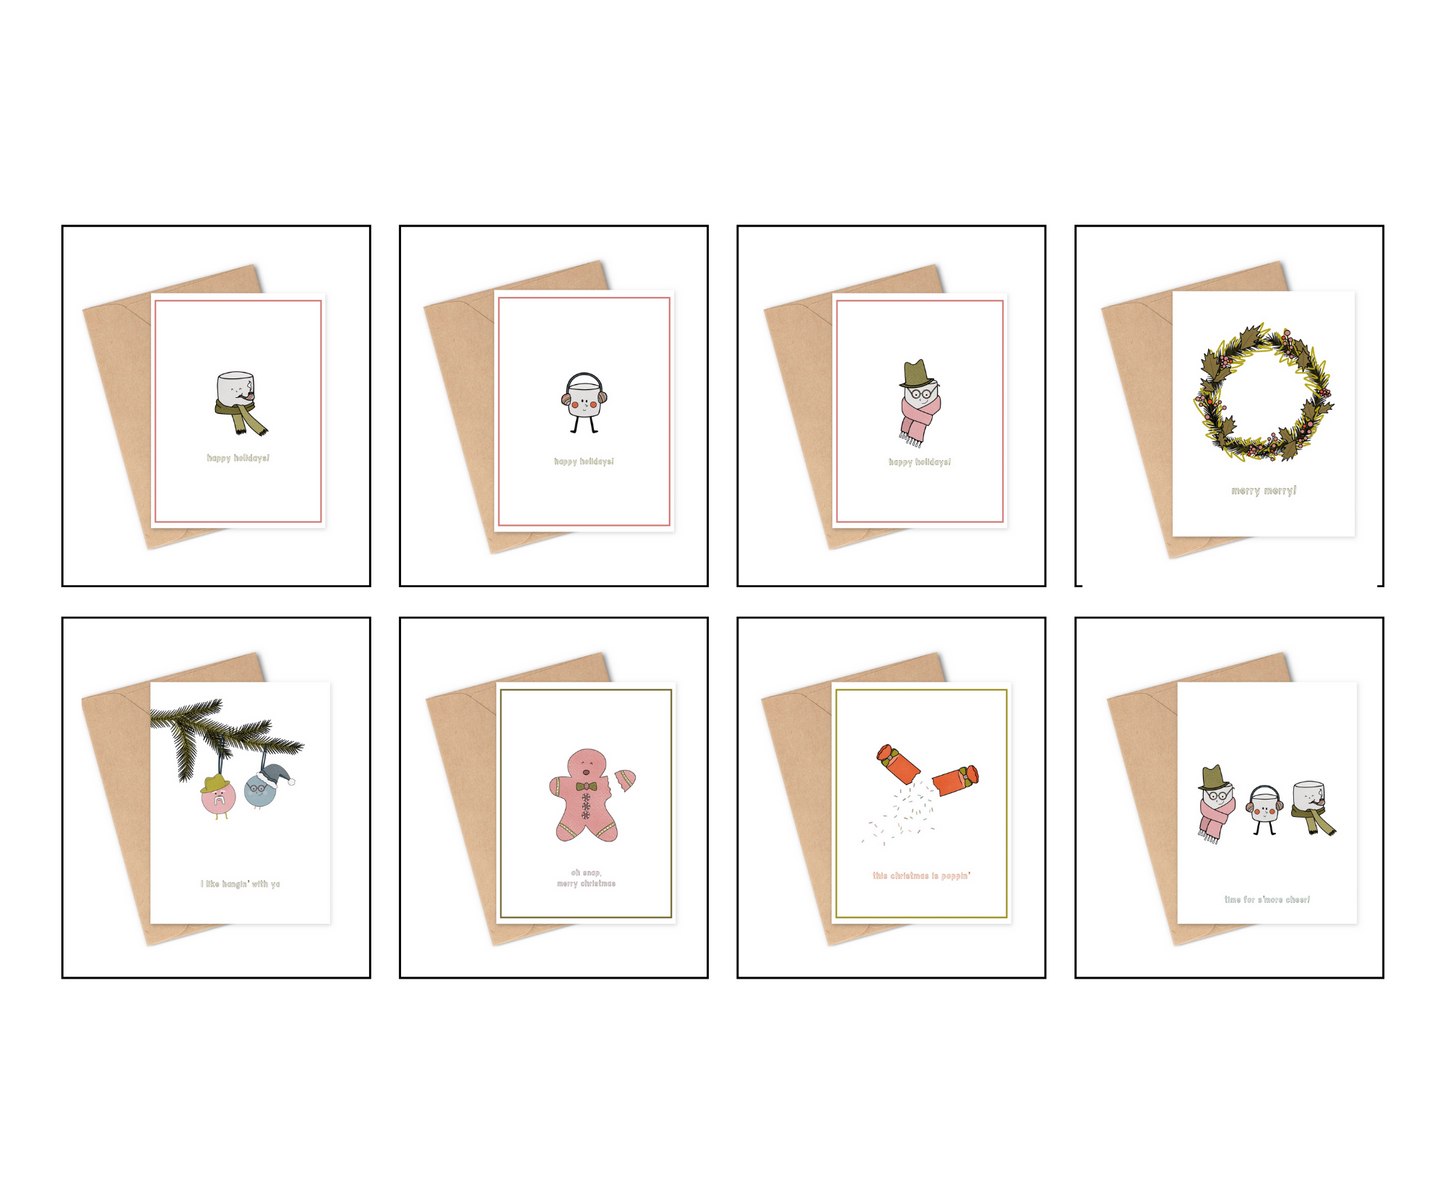 A look at the entire London Sister's christmas collection - there are a total of 8 christmas cards in this collection